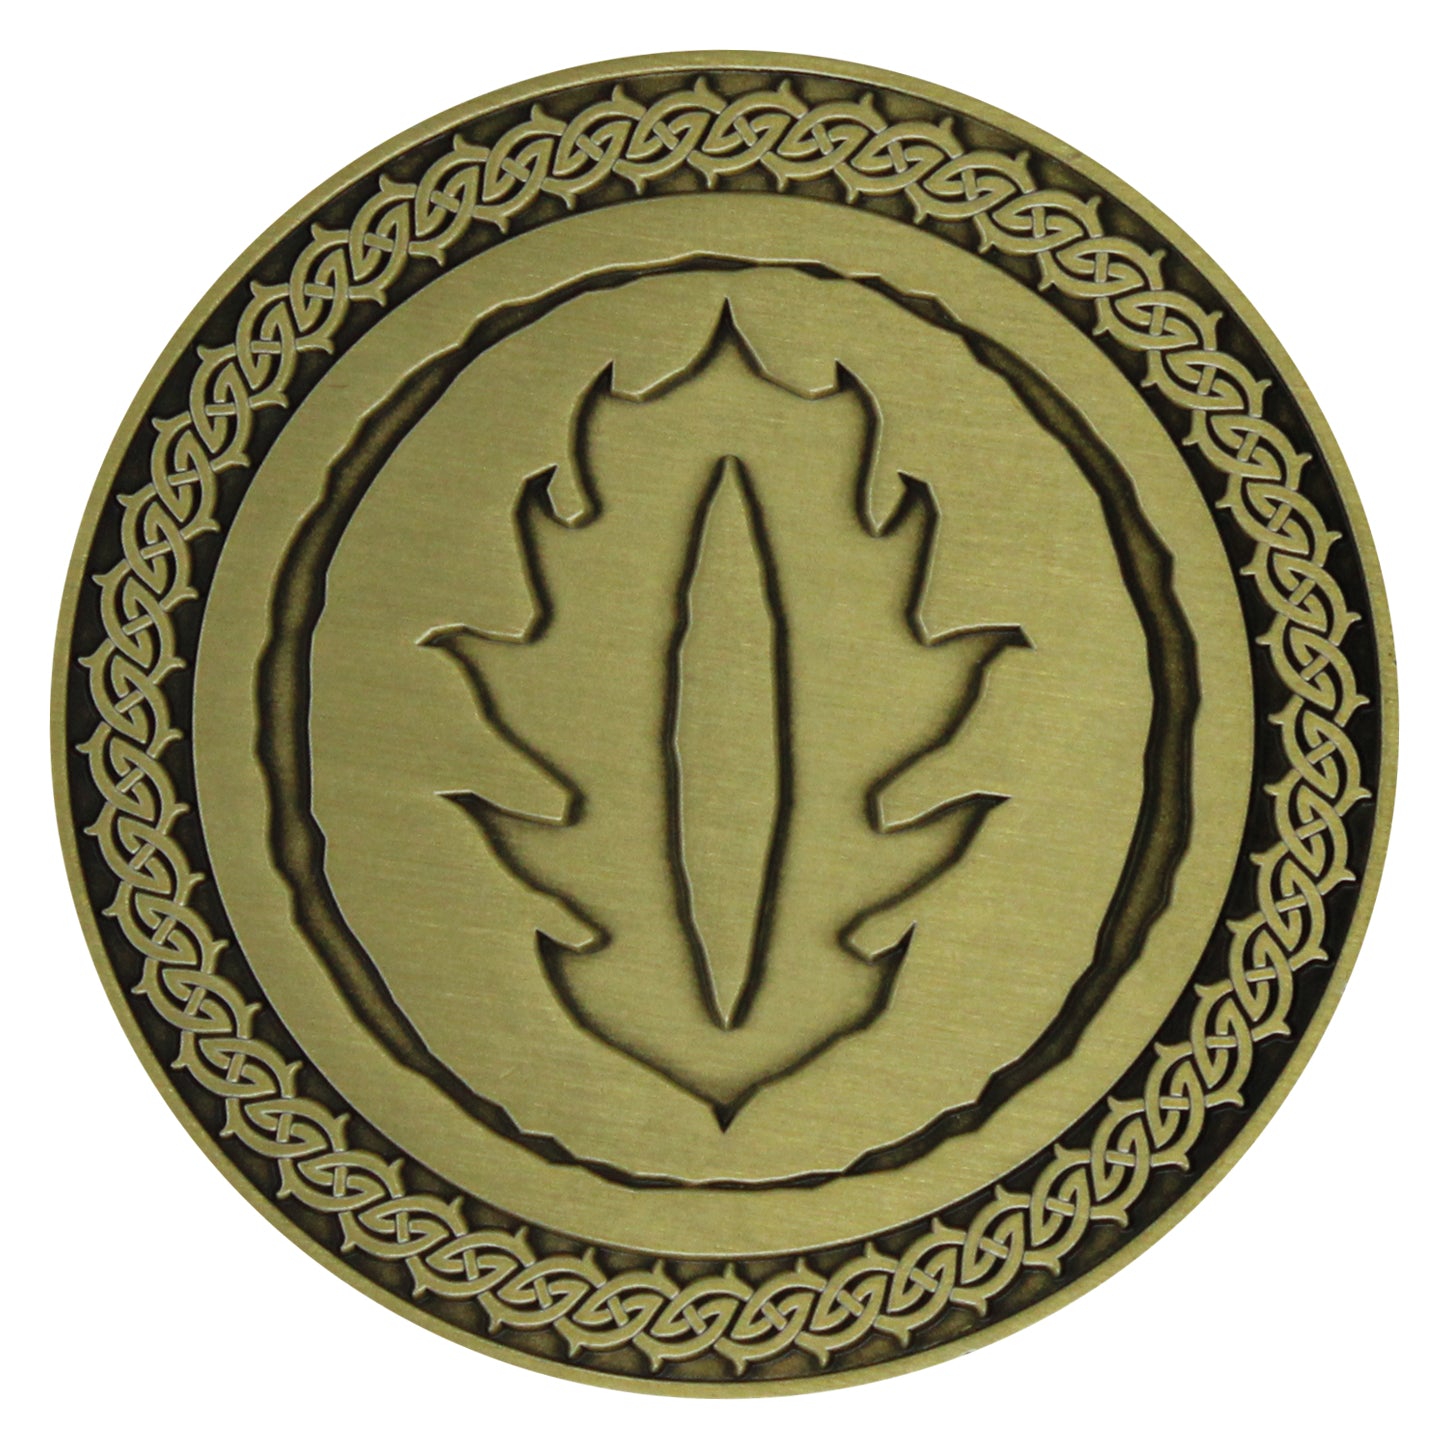 The Lord of the Rings Limited Edition Mordor Medallion